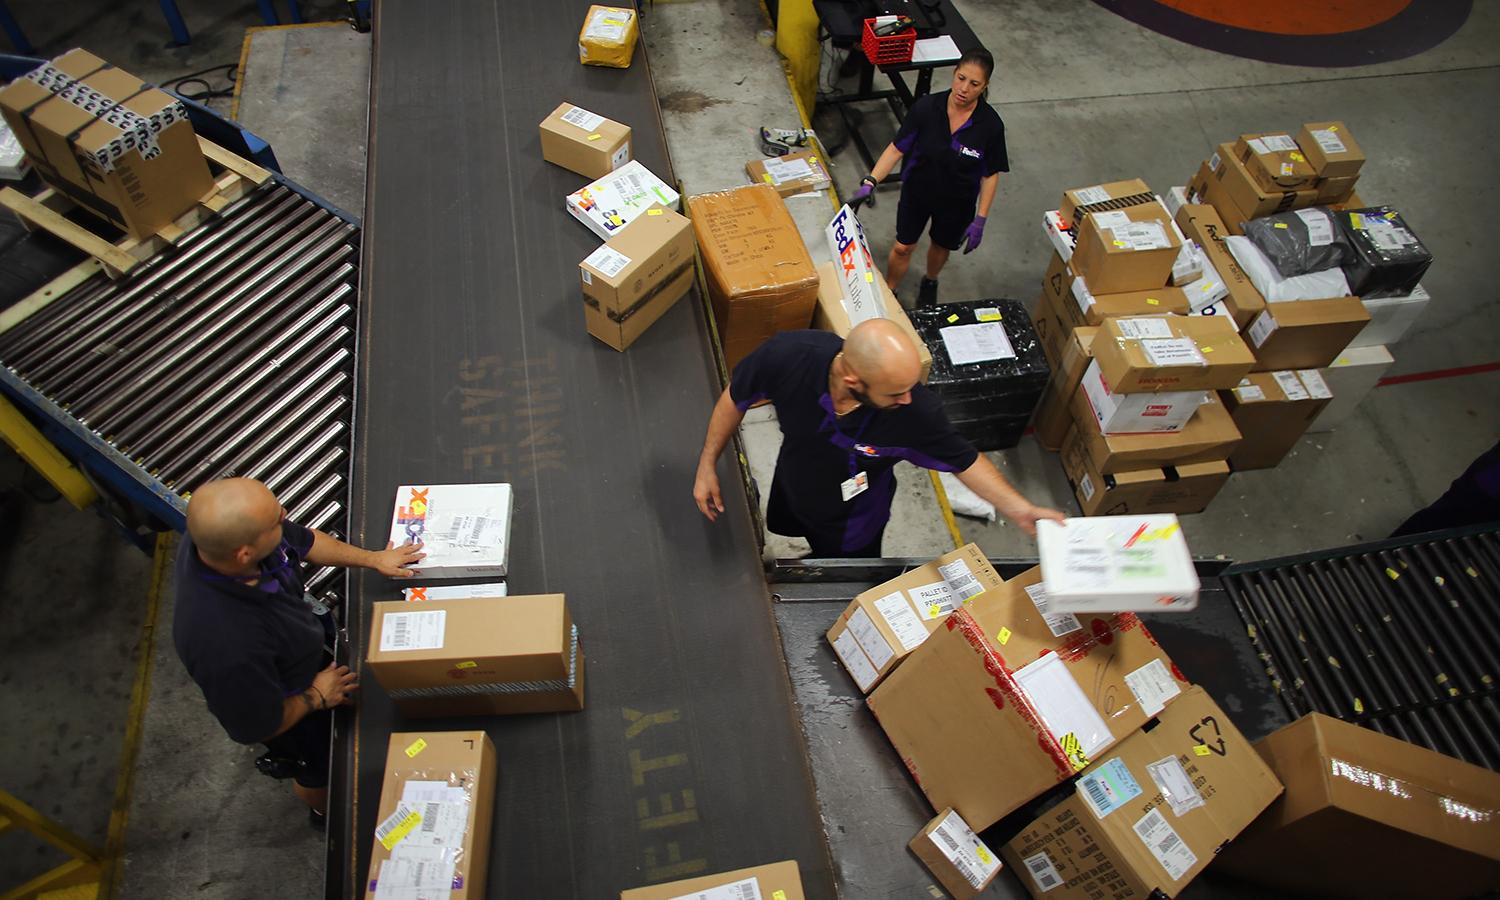 Sansec researchers say Linux-based malware attacking e-commerce servers is taking commands from a control service in Beijing. Pictured: FedEx employees sort through items being shipped through the Fedex World Service Center on Dec. 10, 2012, in Doral, Fla. (Photo by Joe Raedle/Getty Images)